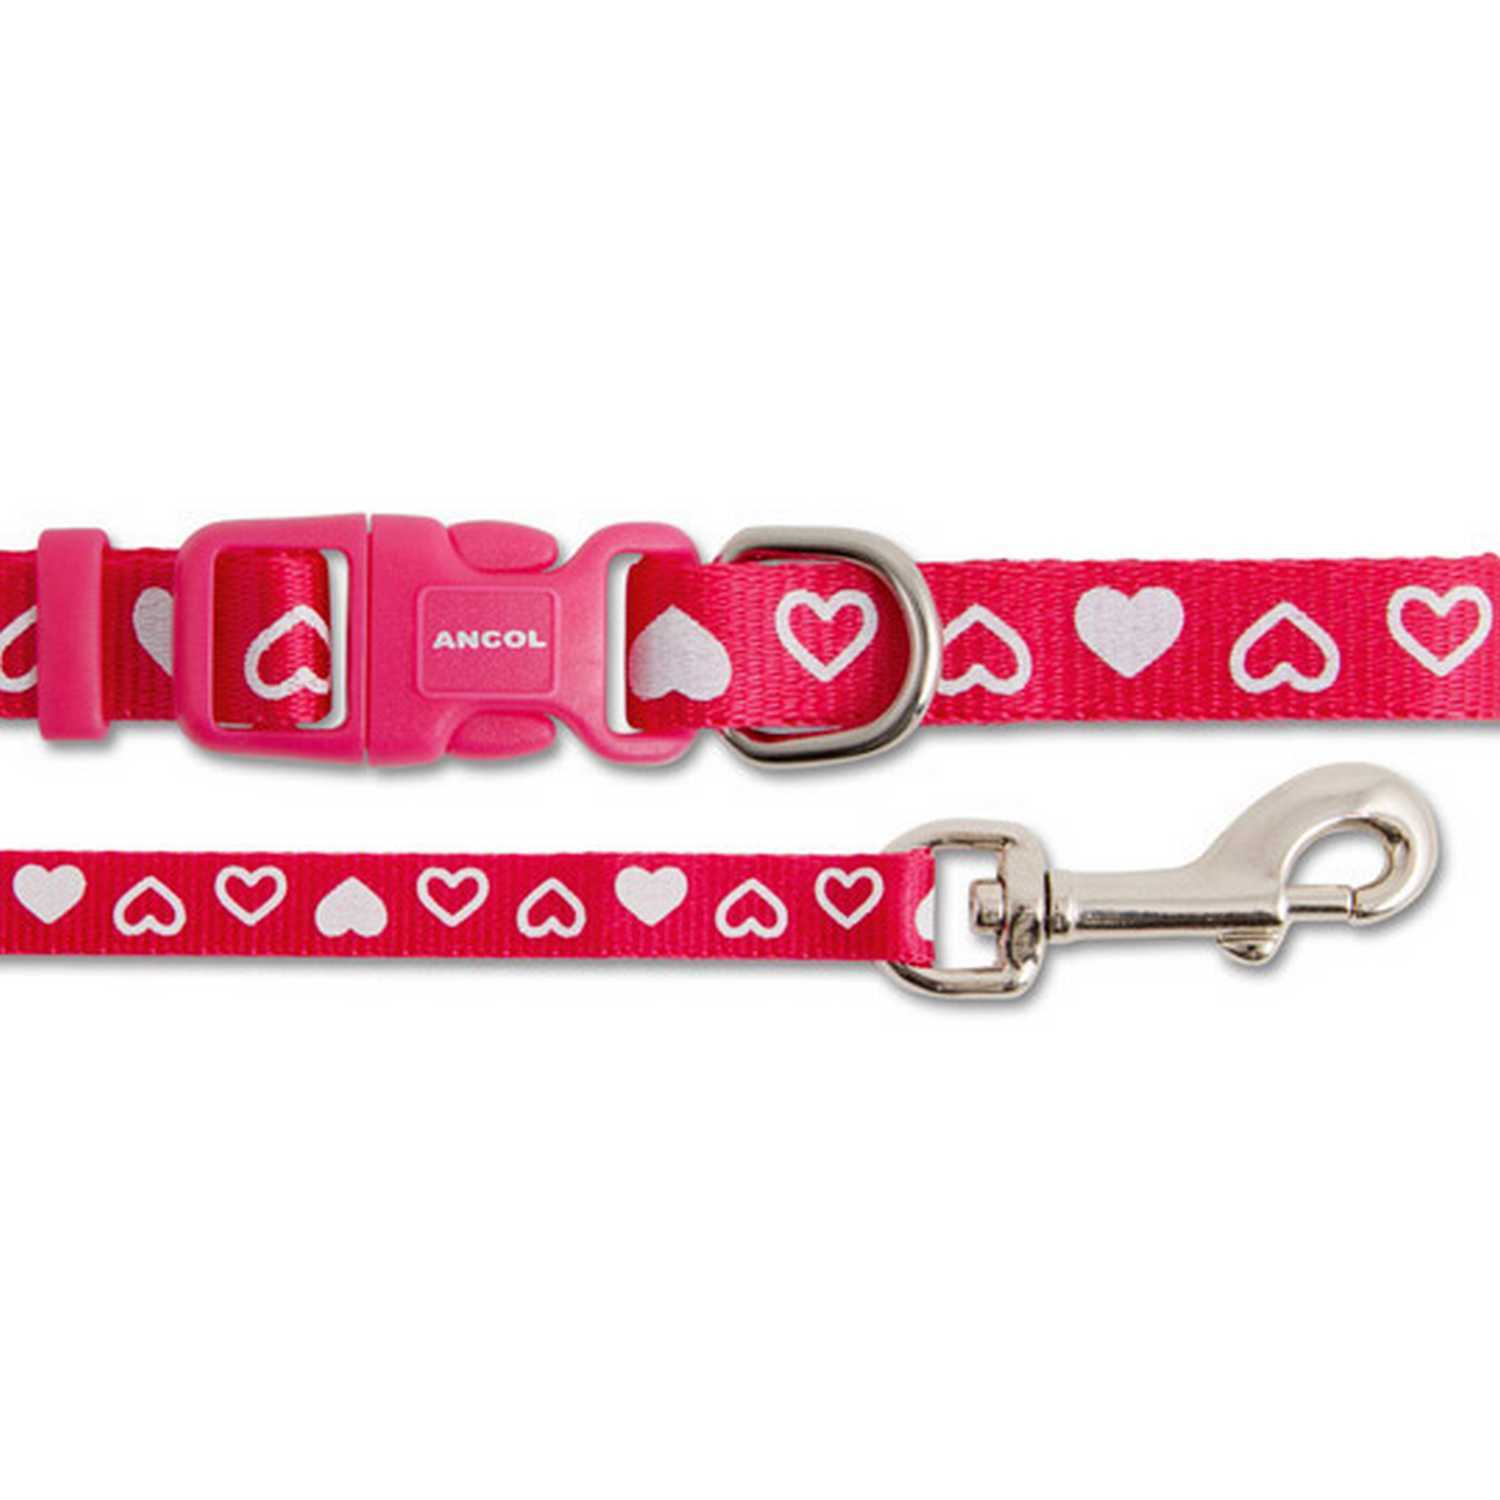 Ancol Small Bite Heart Collar and Lead Set - Raspberry Image